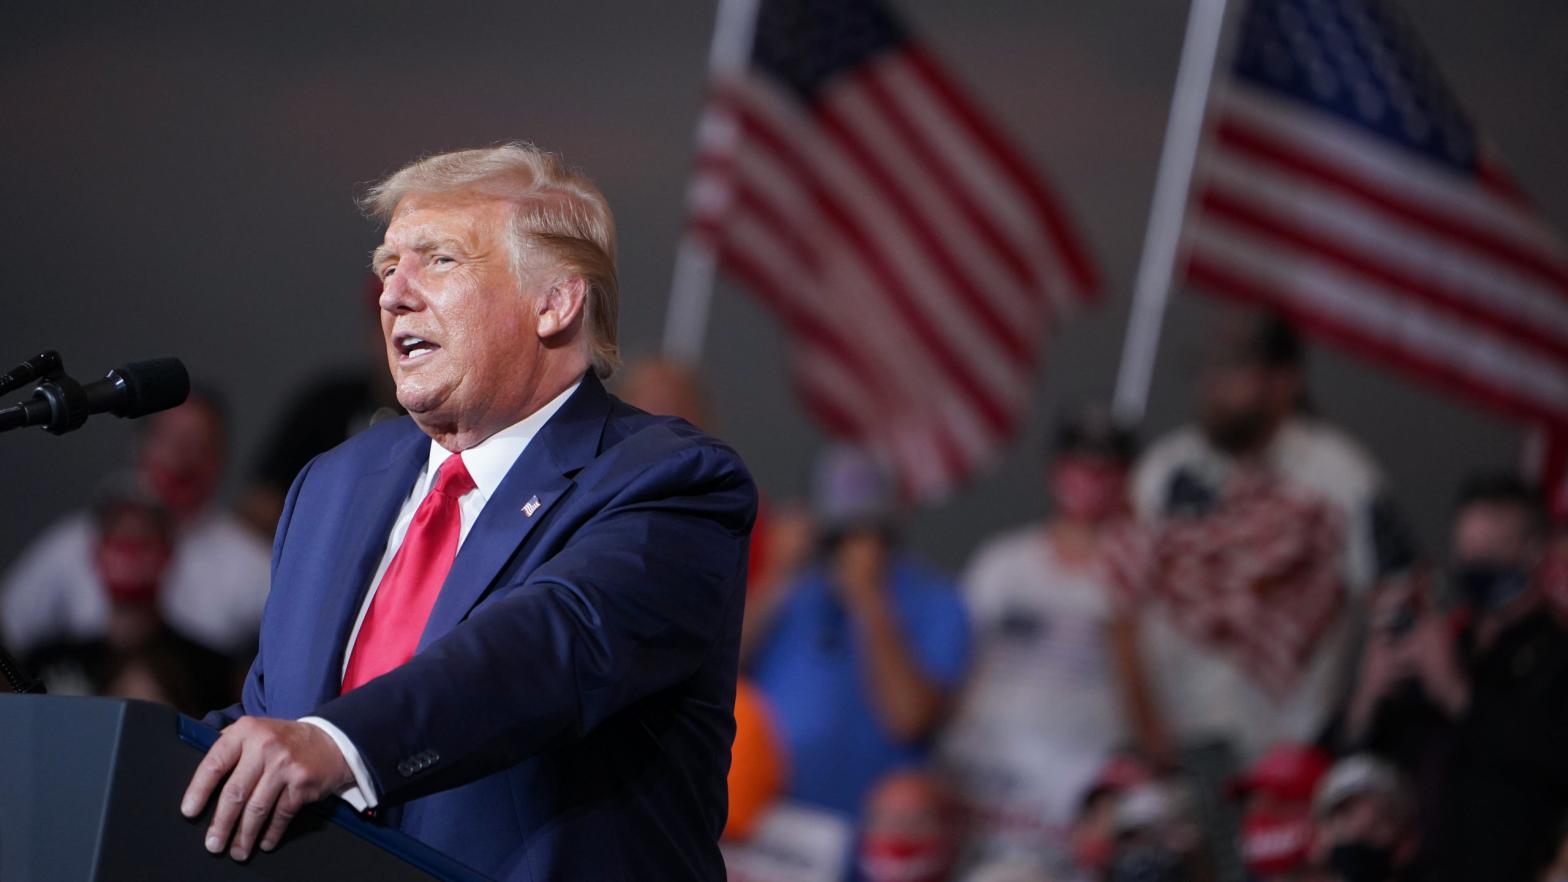 Donald Trump addresses supporters during a rally in Winston-Salem, North Carolina on September 8, 2020.  (Photo: Mandel Ngan, Getty Images)